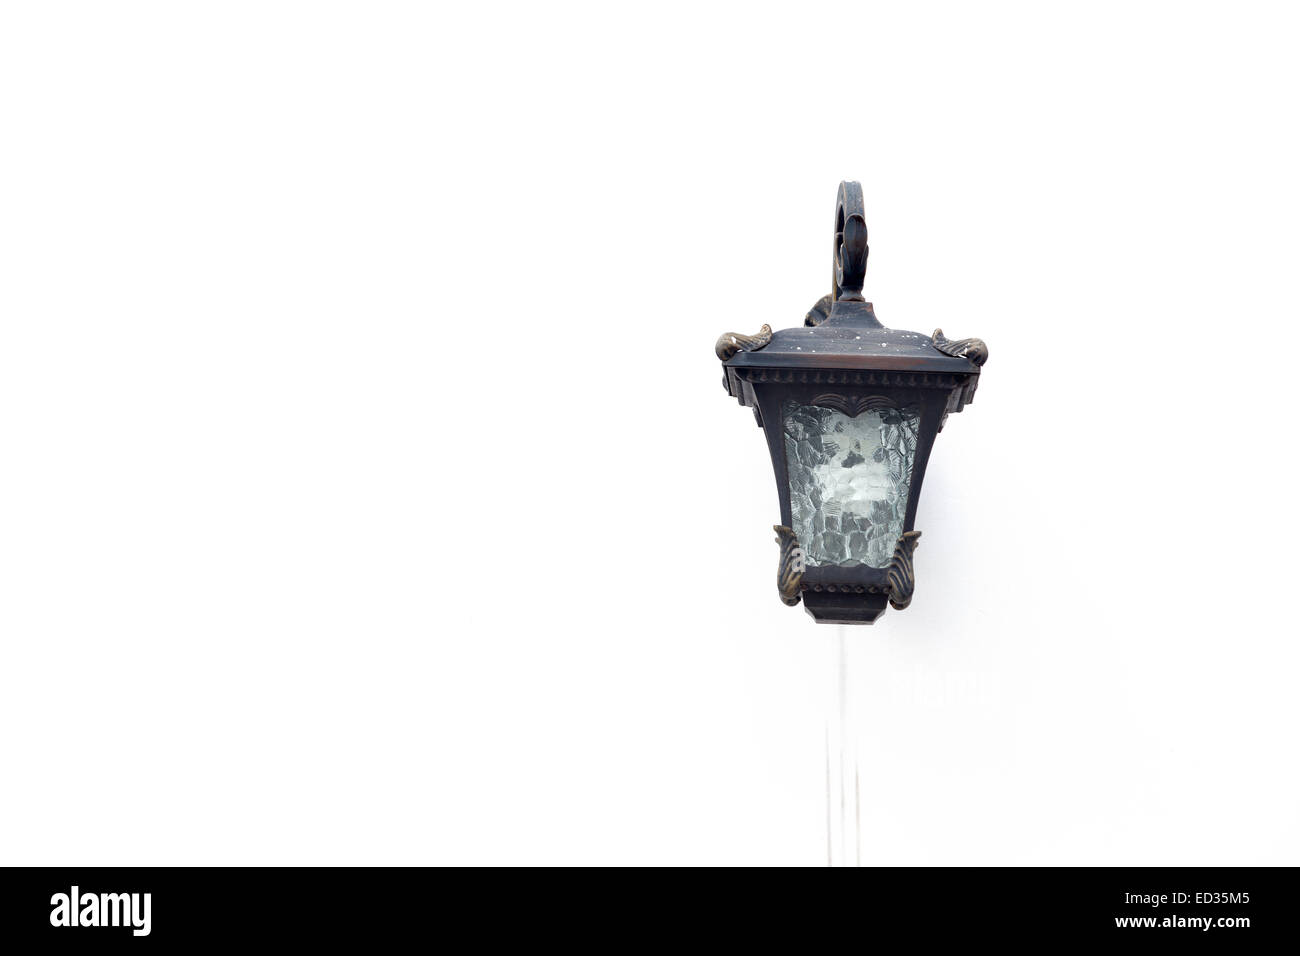 Old-fashioned wall street lamp isolated on white Stock Photo